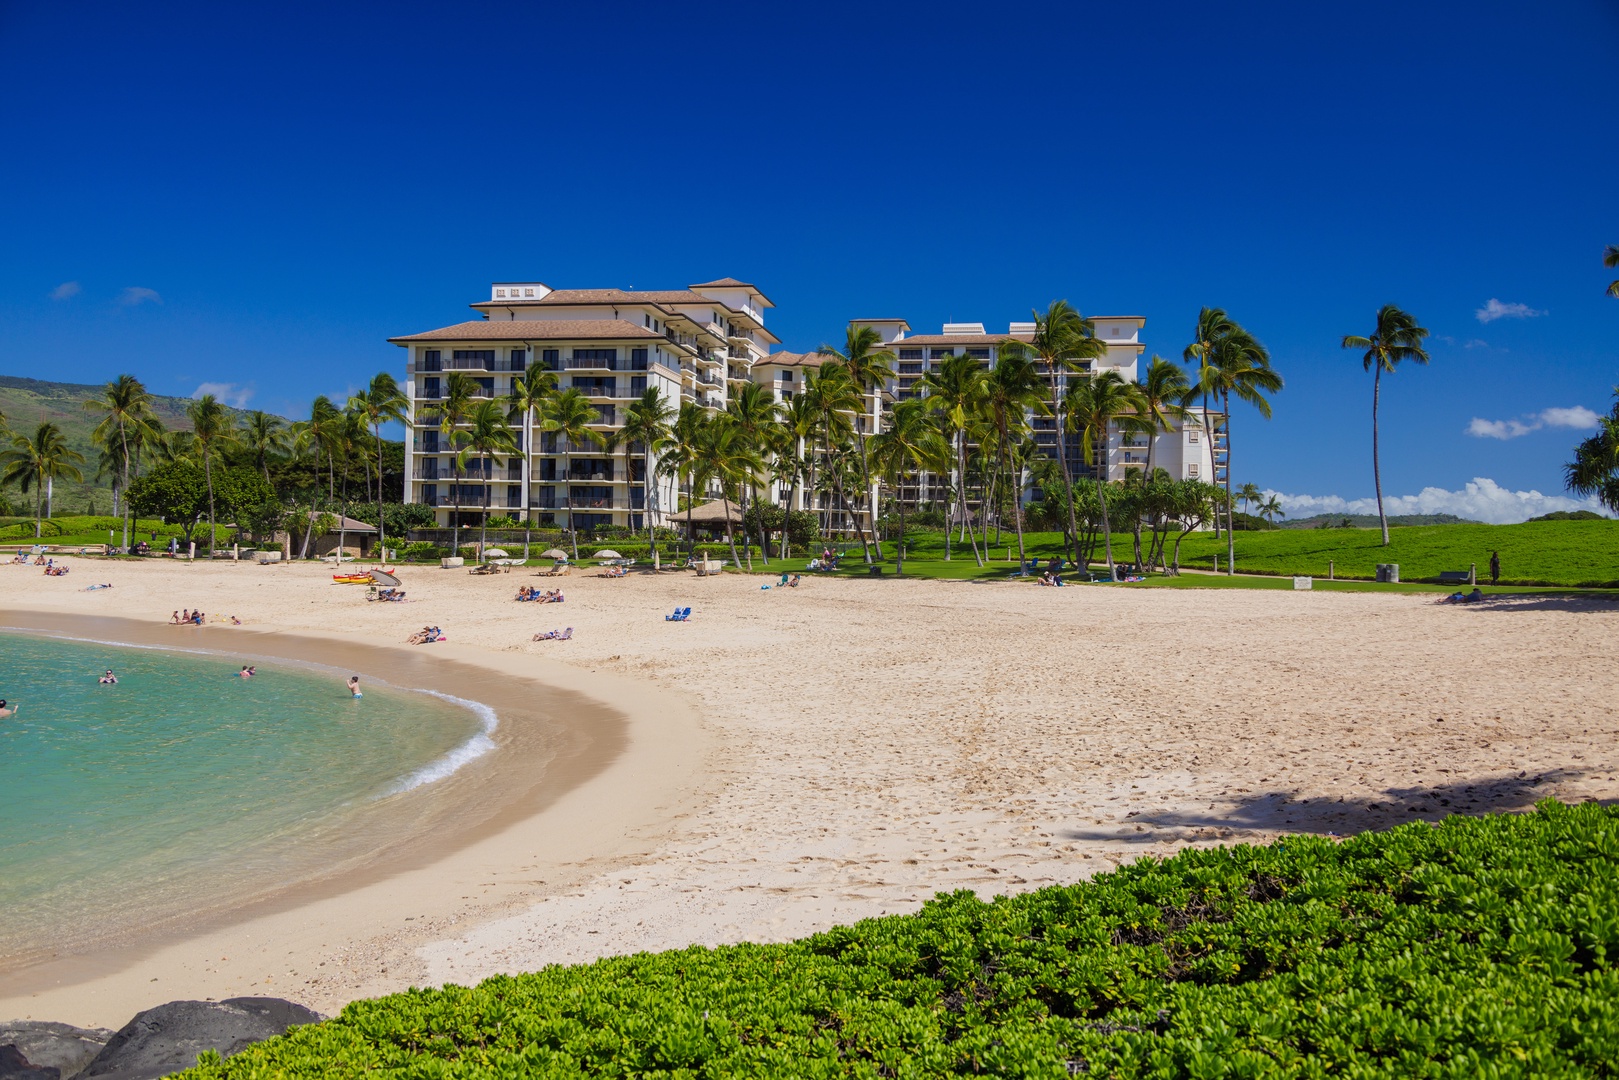 Kapolei Vacation Rentals, Ko Olina Kai 1035D - Ko Olina's private lagoons with soft sands and crystal blue water, perfect for afternoon swim or spectacular views